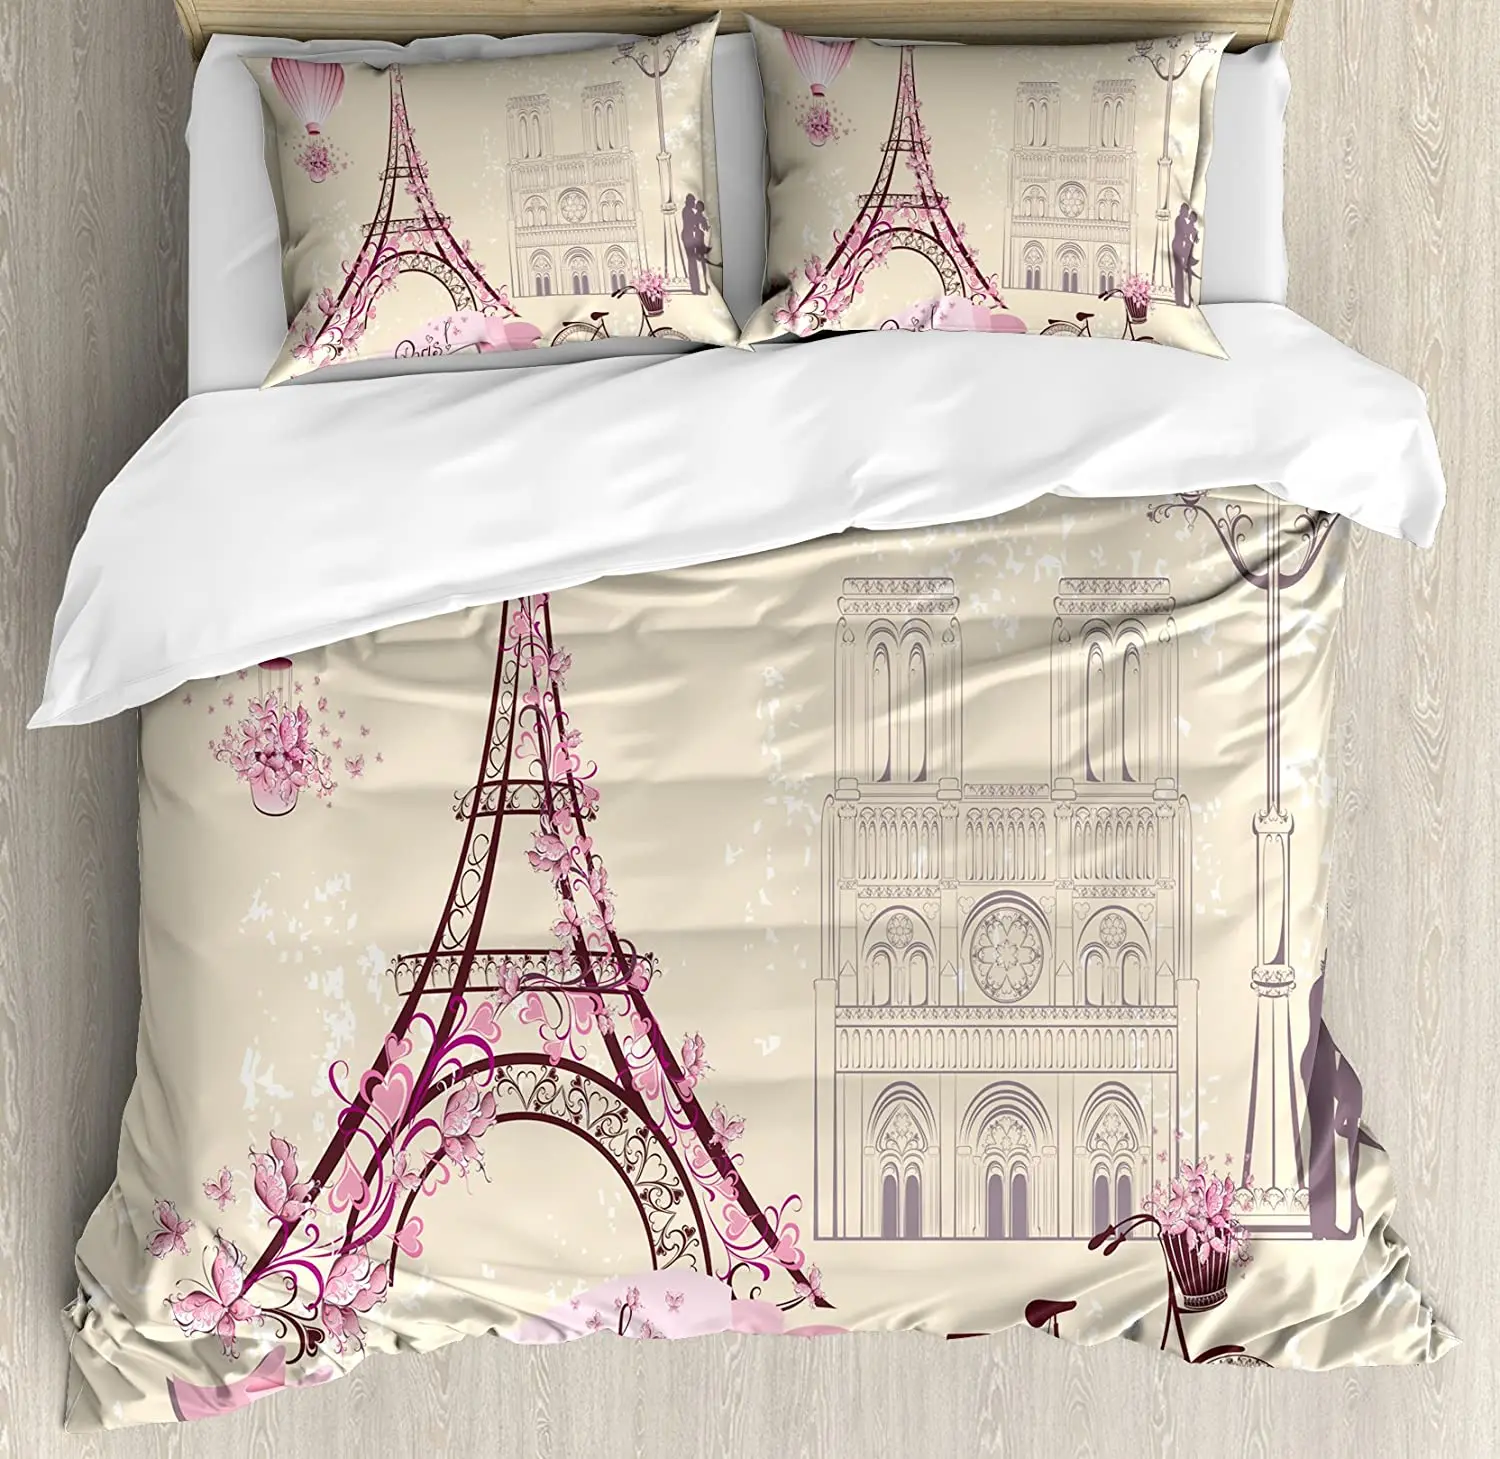 Kiss Bedding Set For Bedroom Bed Home Floral Paris Symbols Landmarks Eiffel Tower Hot Air Duvet Cover Quilt Cover And Pillowcase